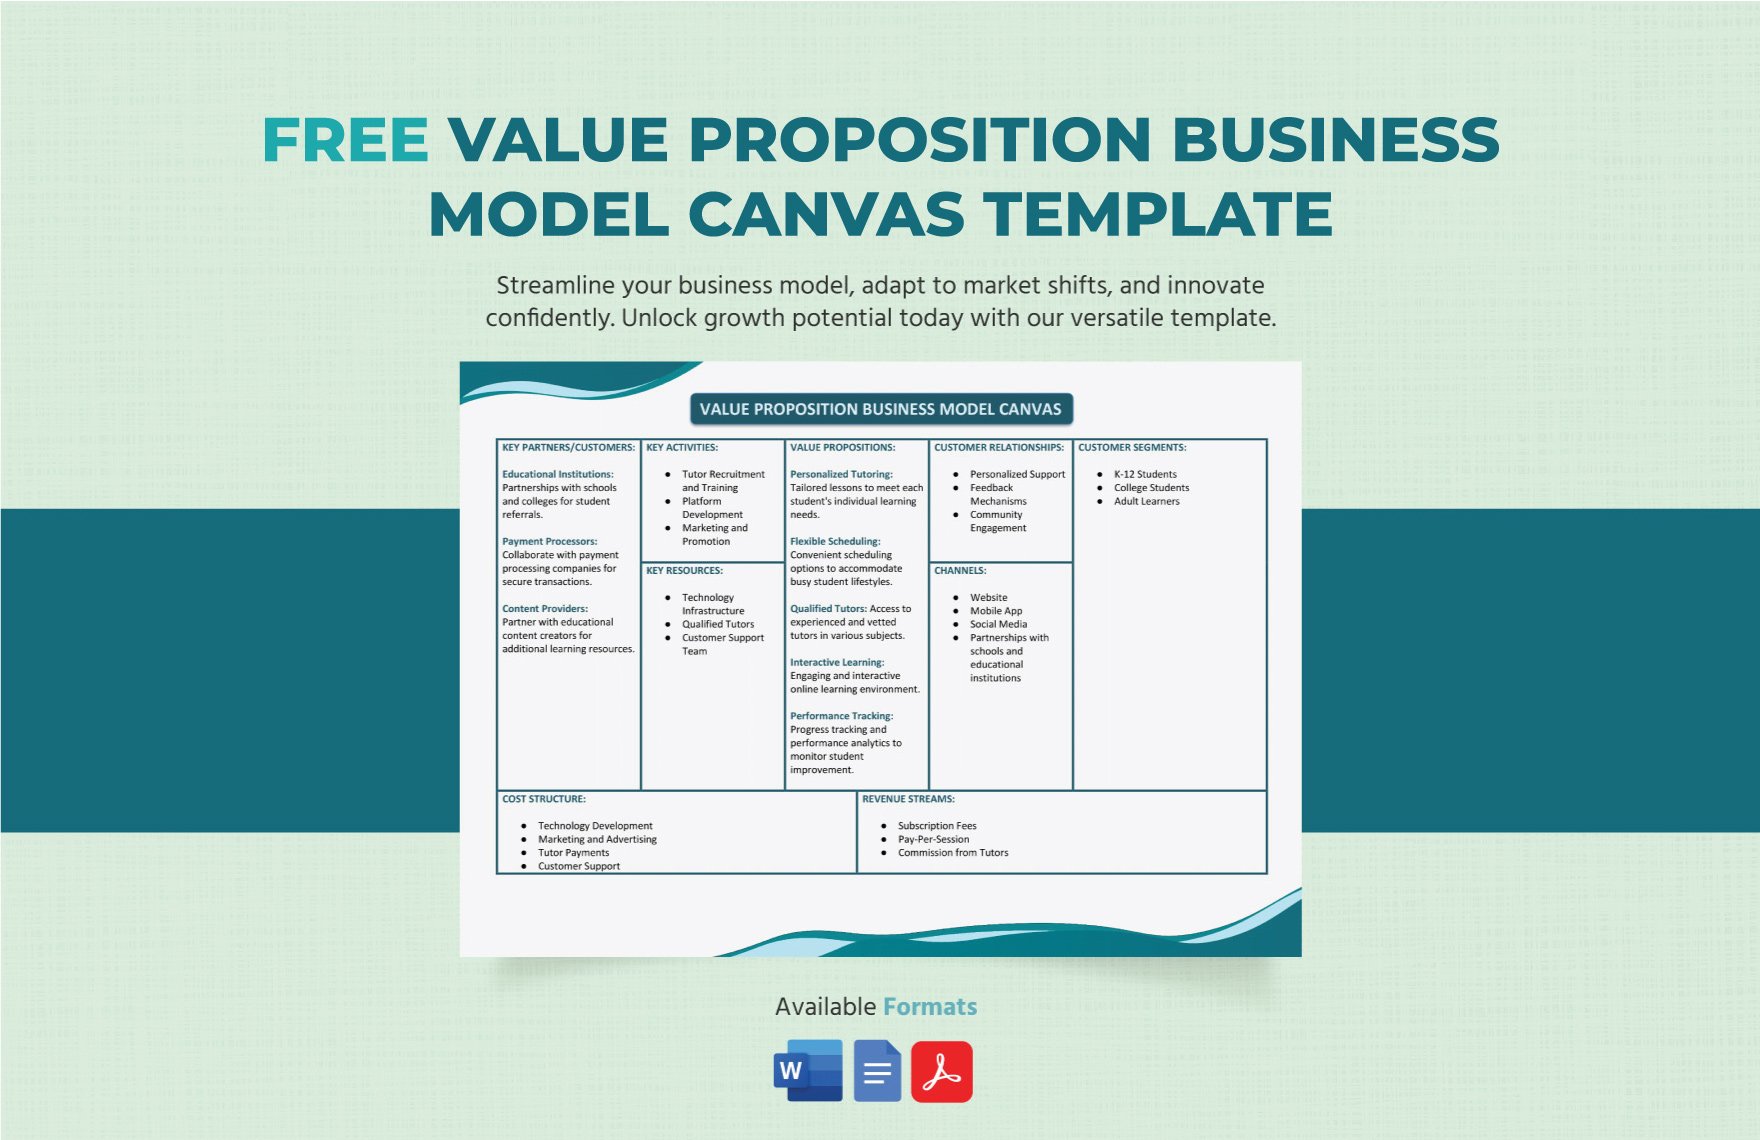 Free Value Proposition Business Model Canvas Template in Word, Google Docs, PDF